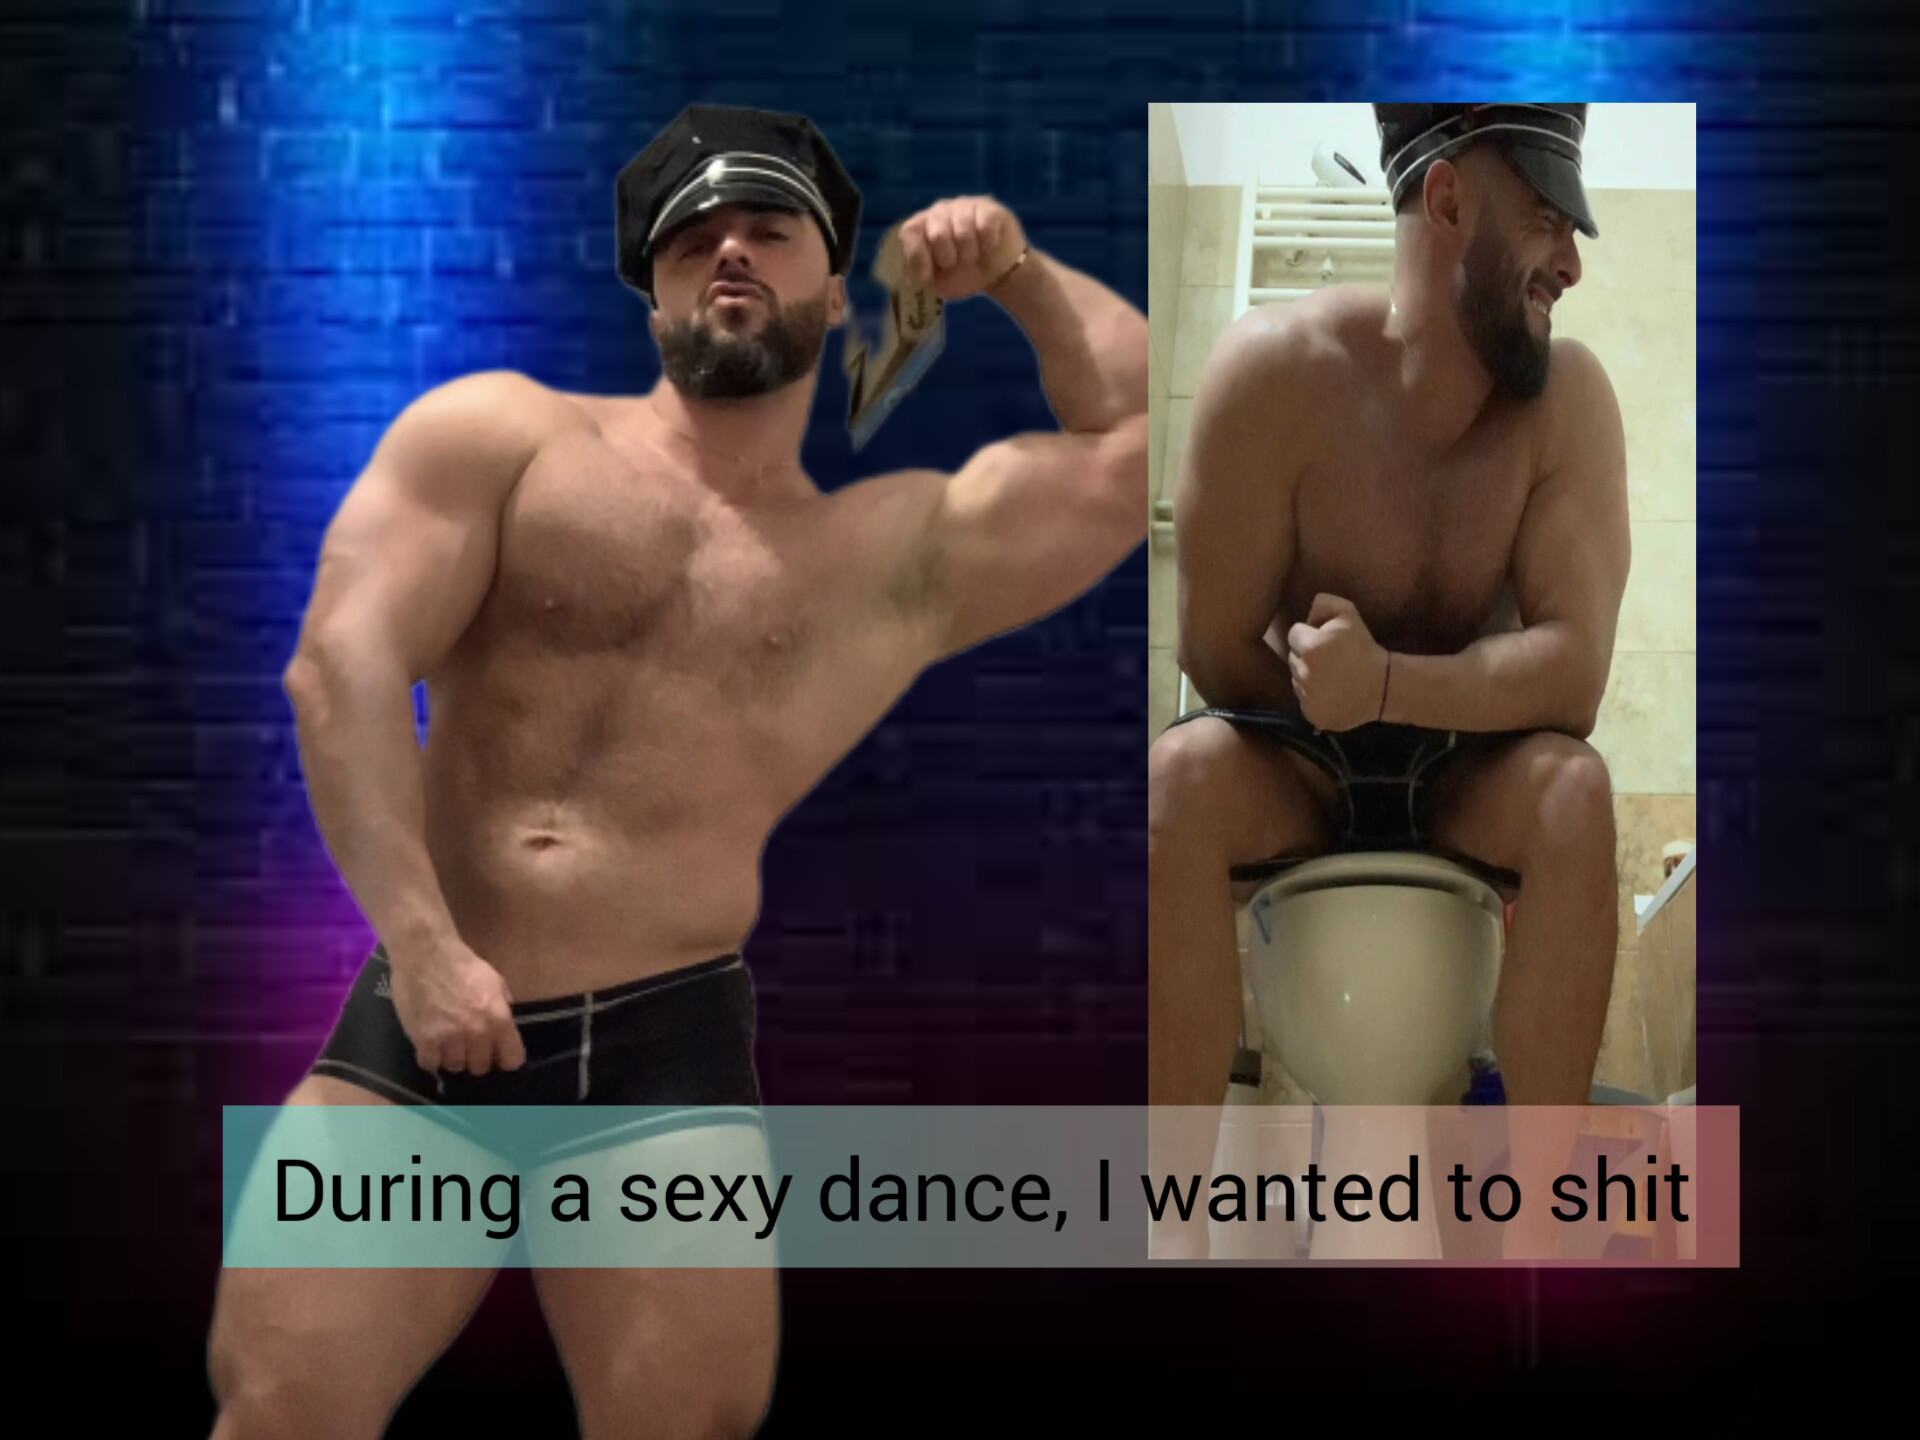 A guy shits after a sexy dance